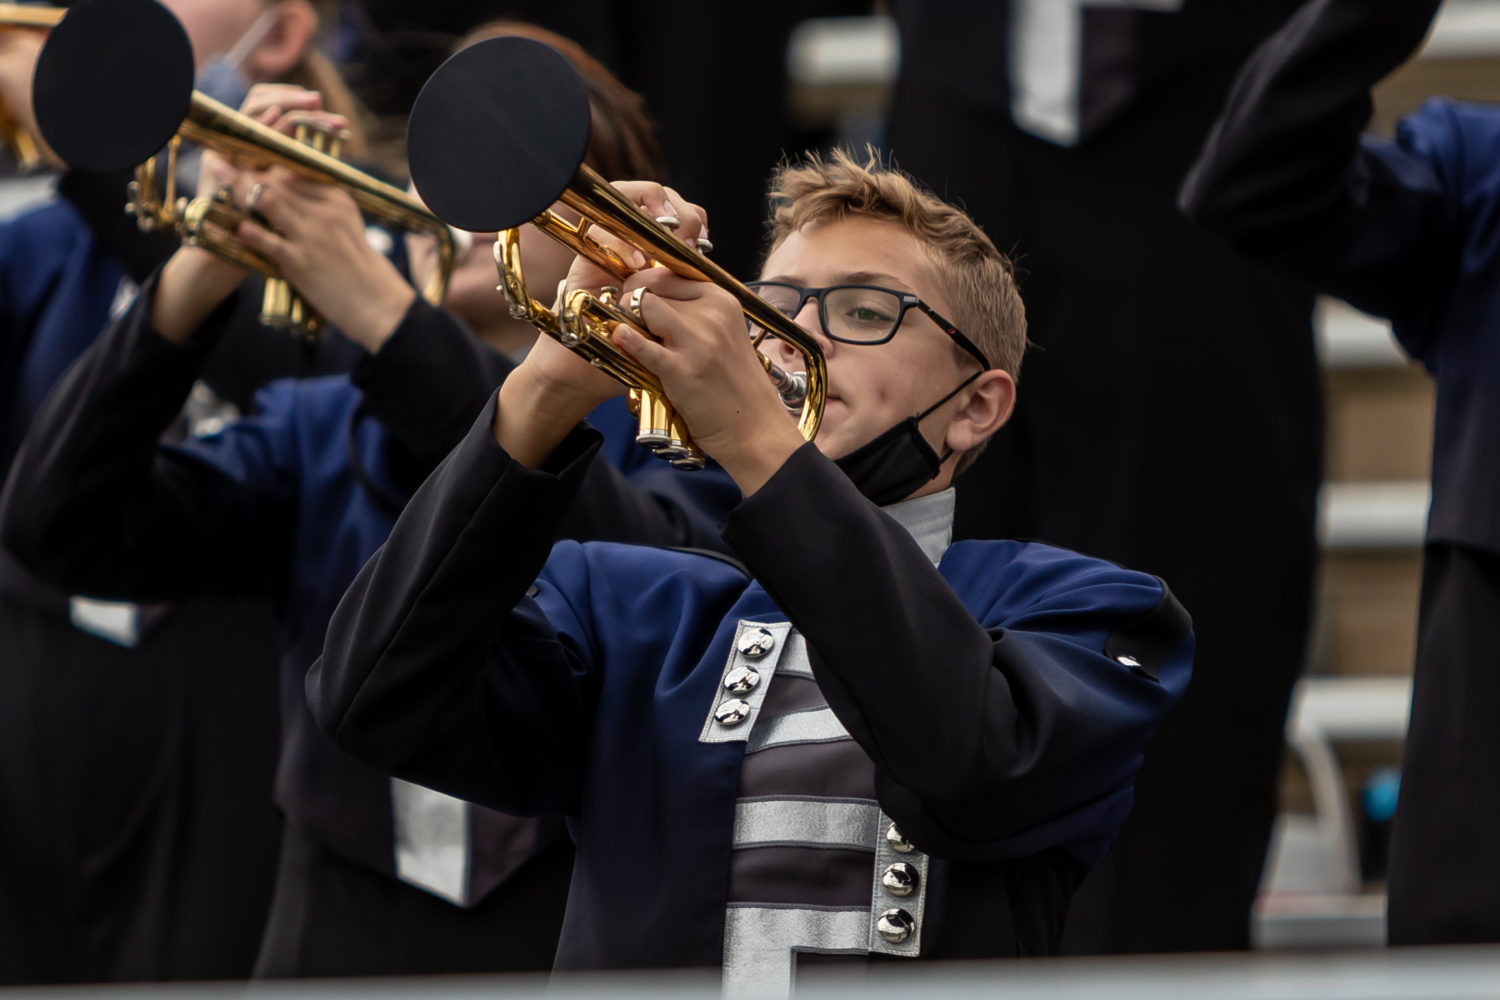 " Student holds trumpet while playing"